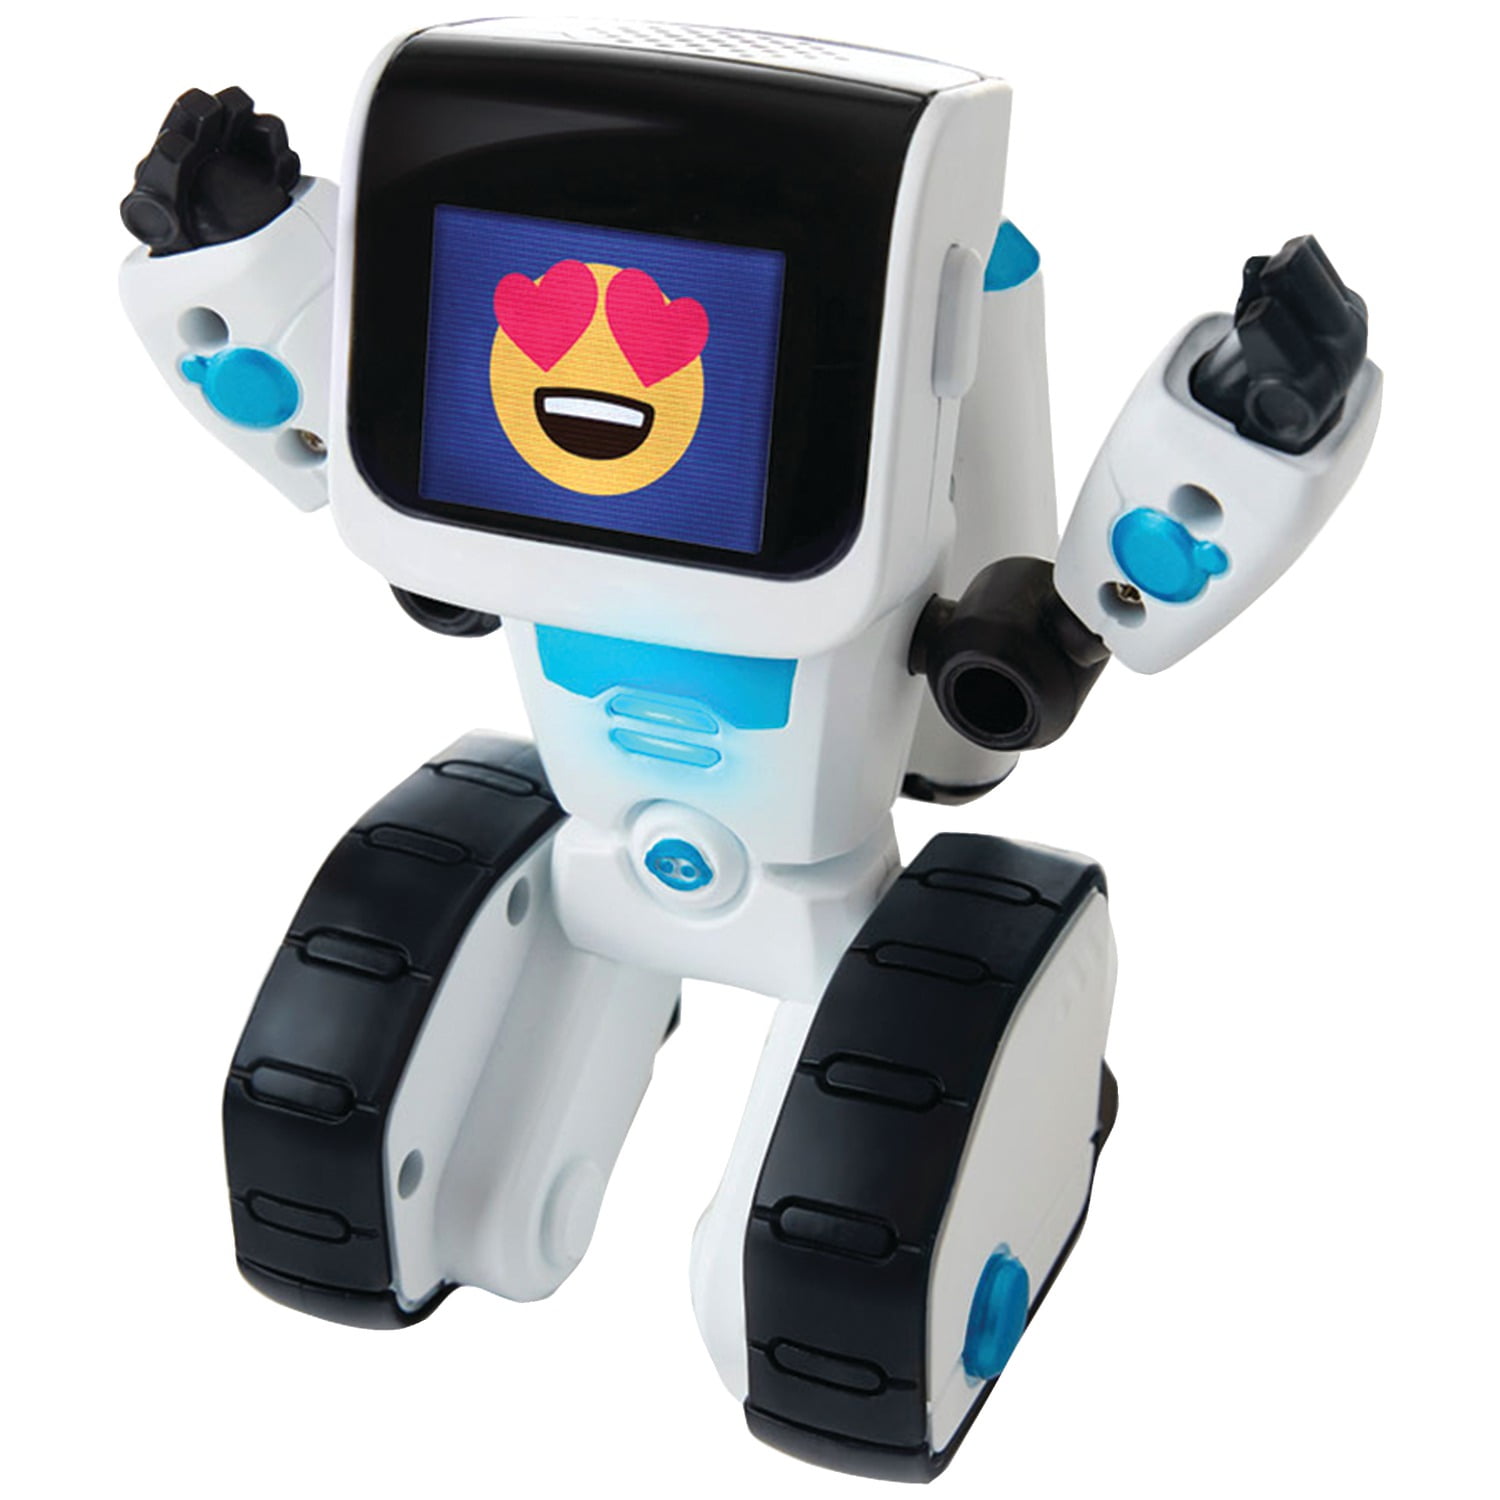 WowWee Coder MiP the STEM-based Toy Robot Transparent 